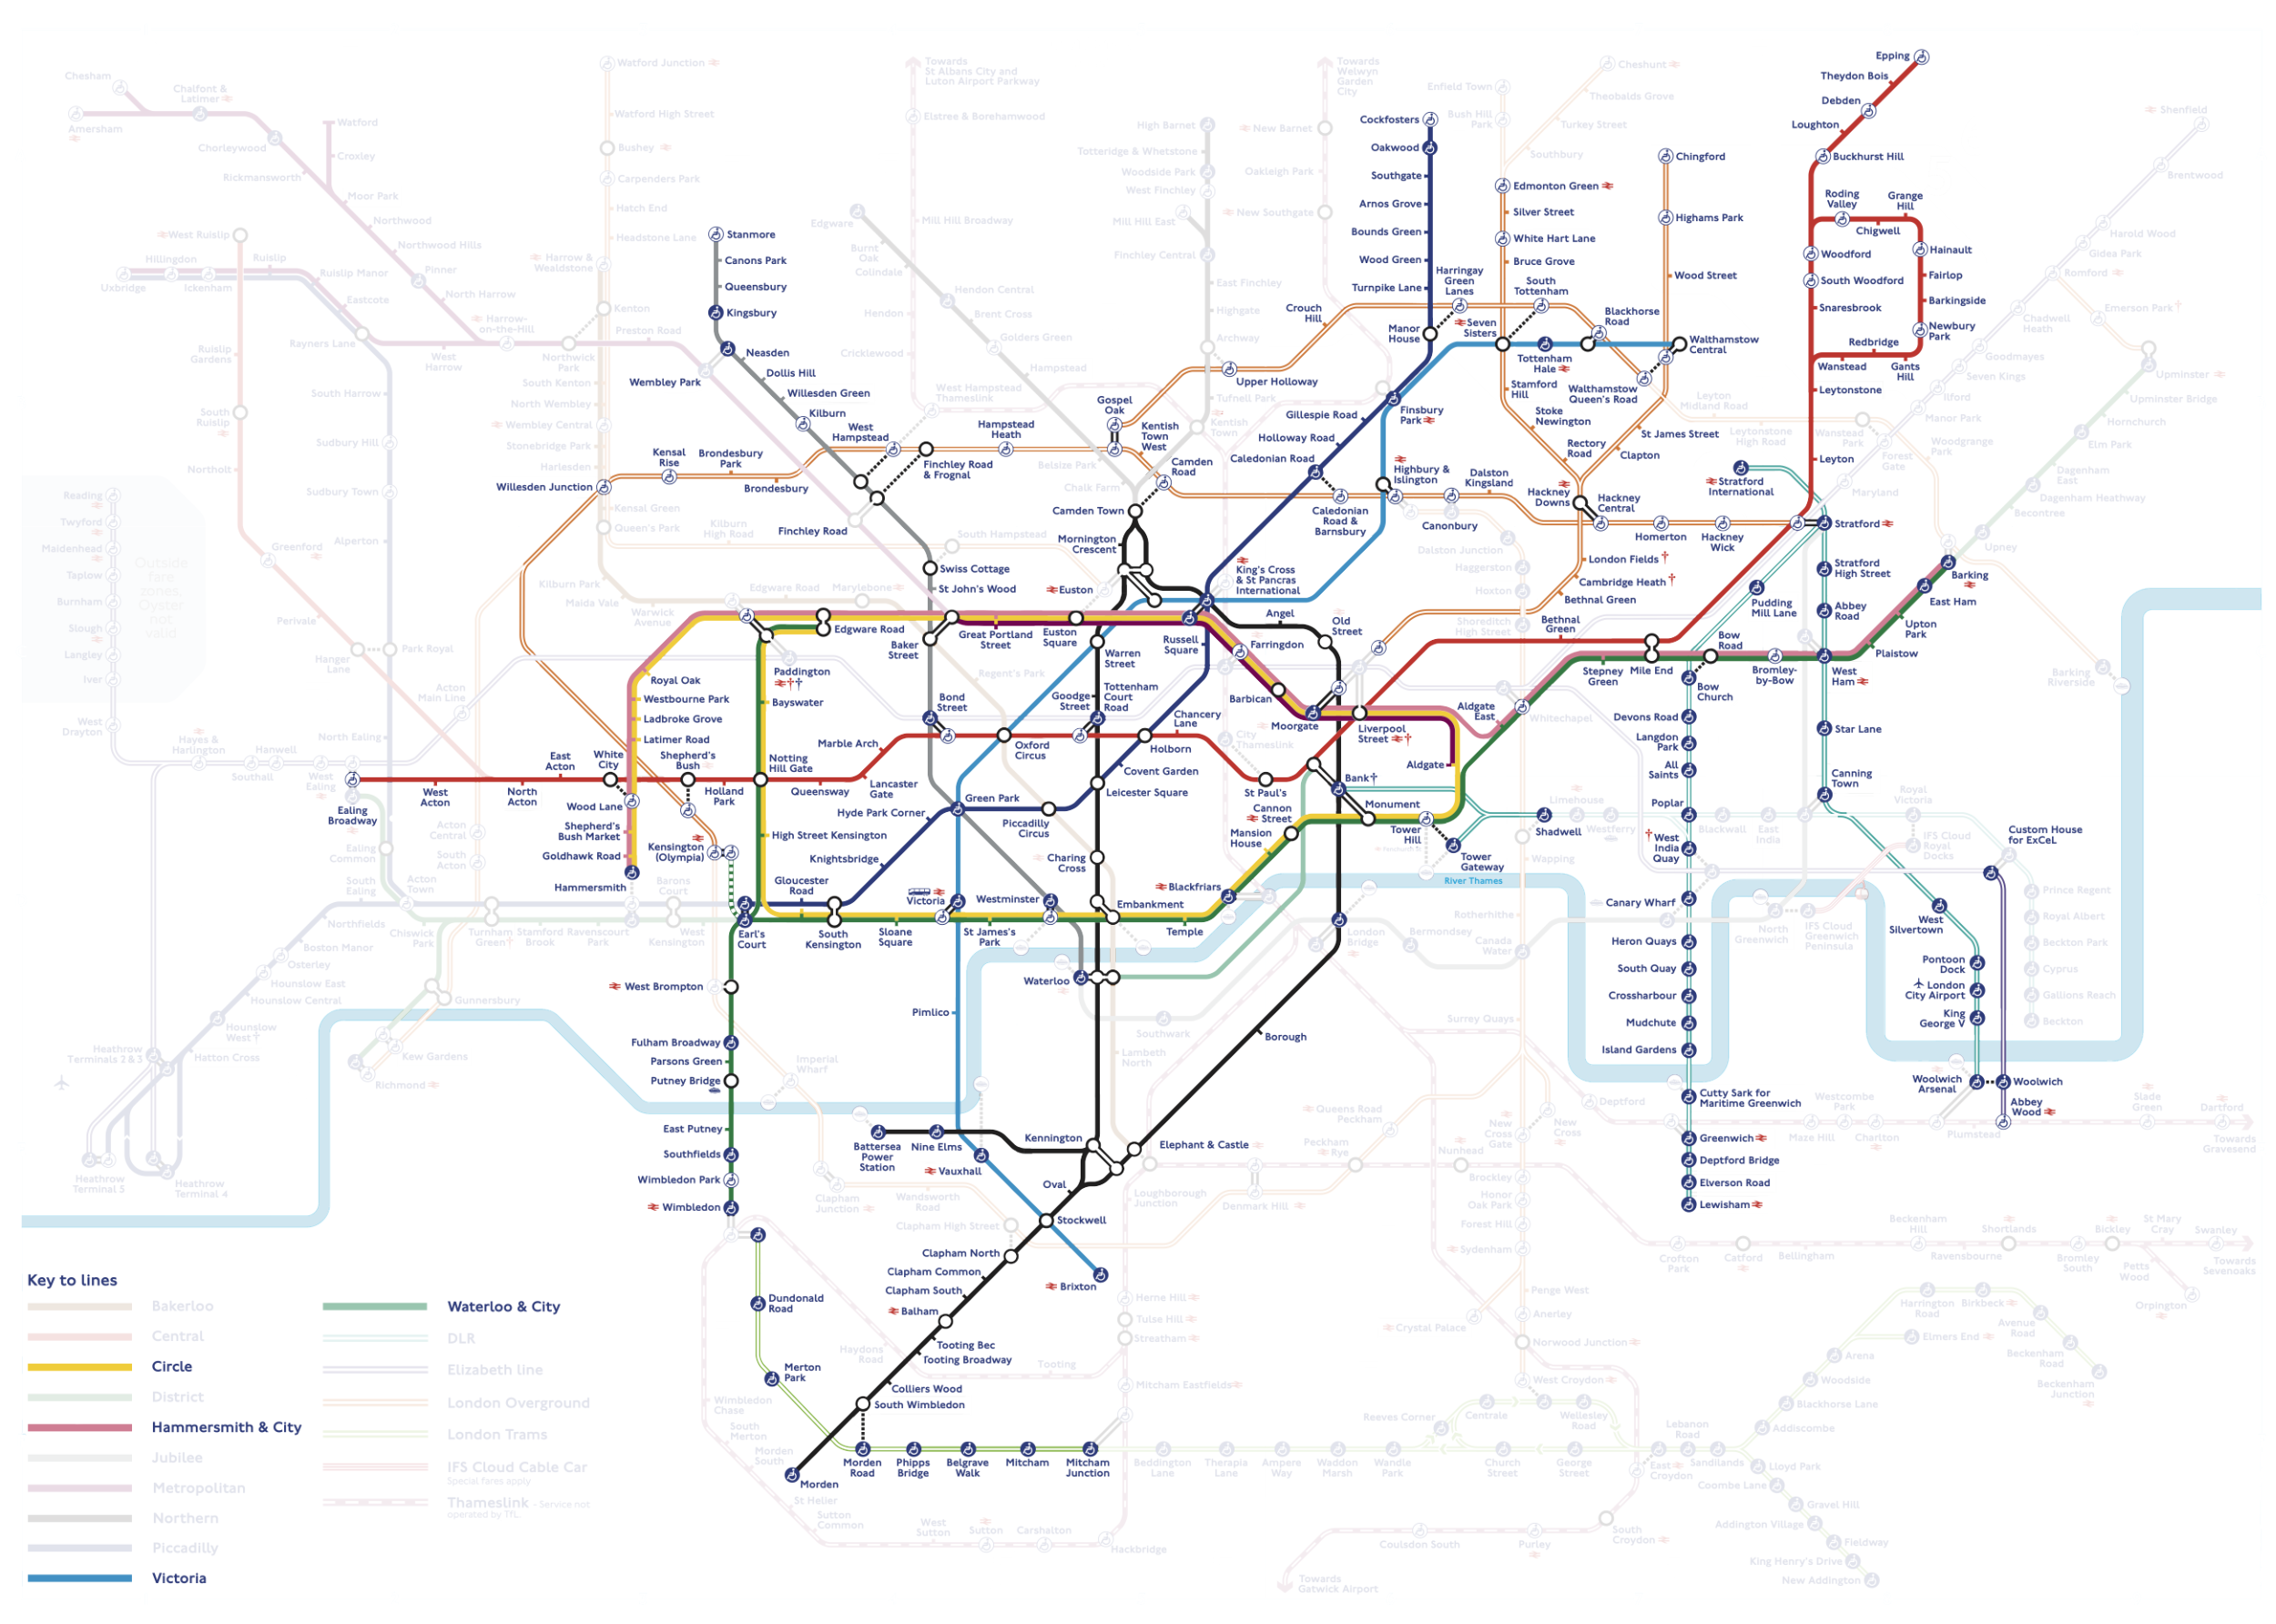 The maps showing the tube lines that I've walked so far - including the Hammersmith and city. Woo!